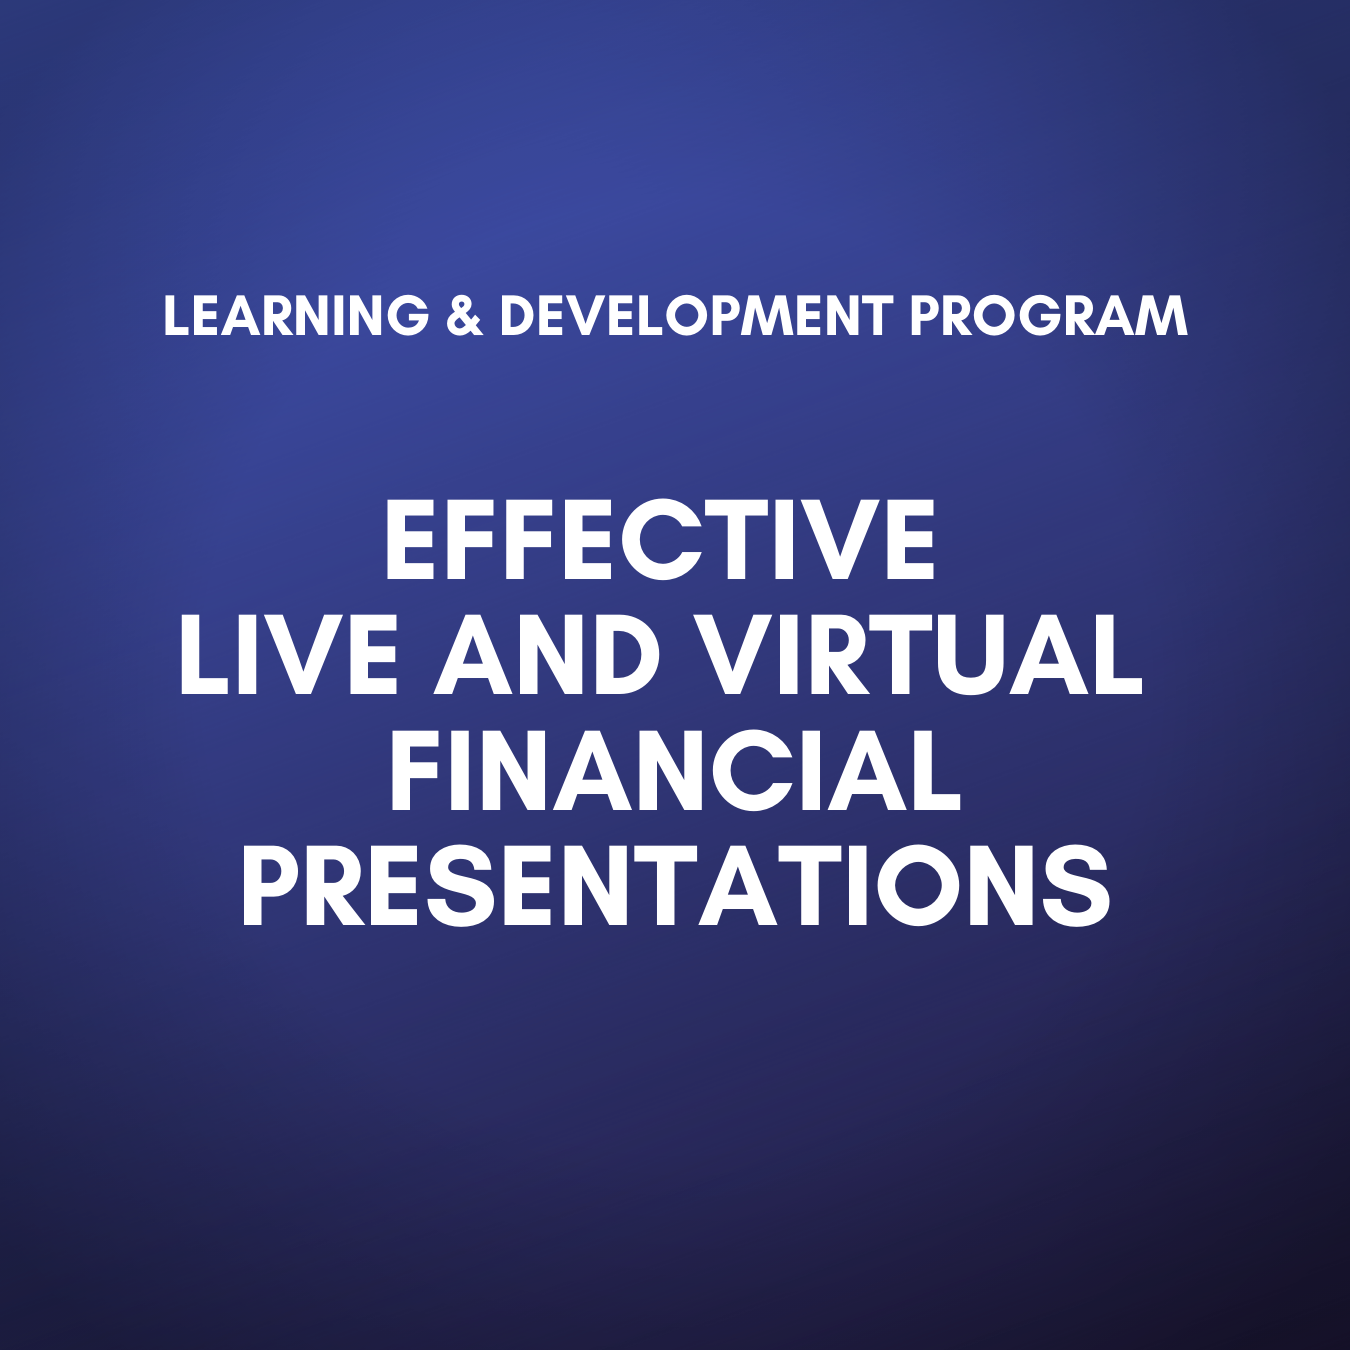 Effective Live and Virtual Financial Presentations